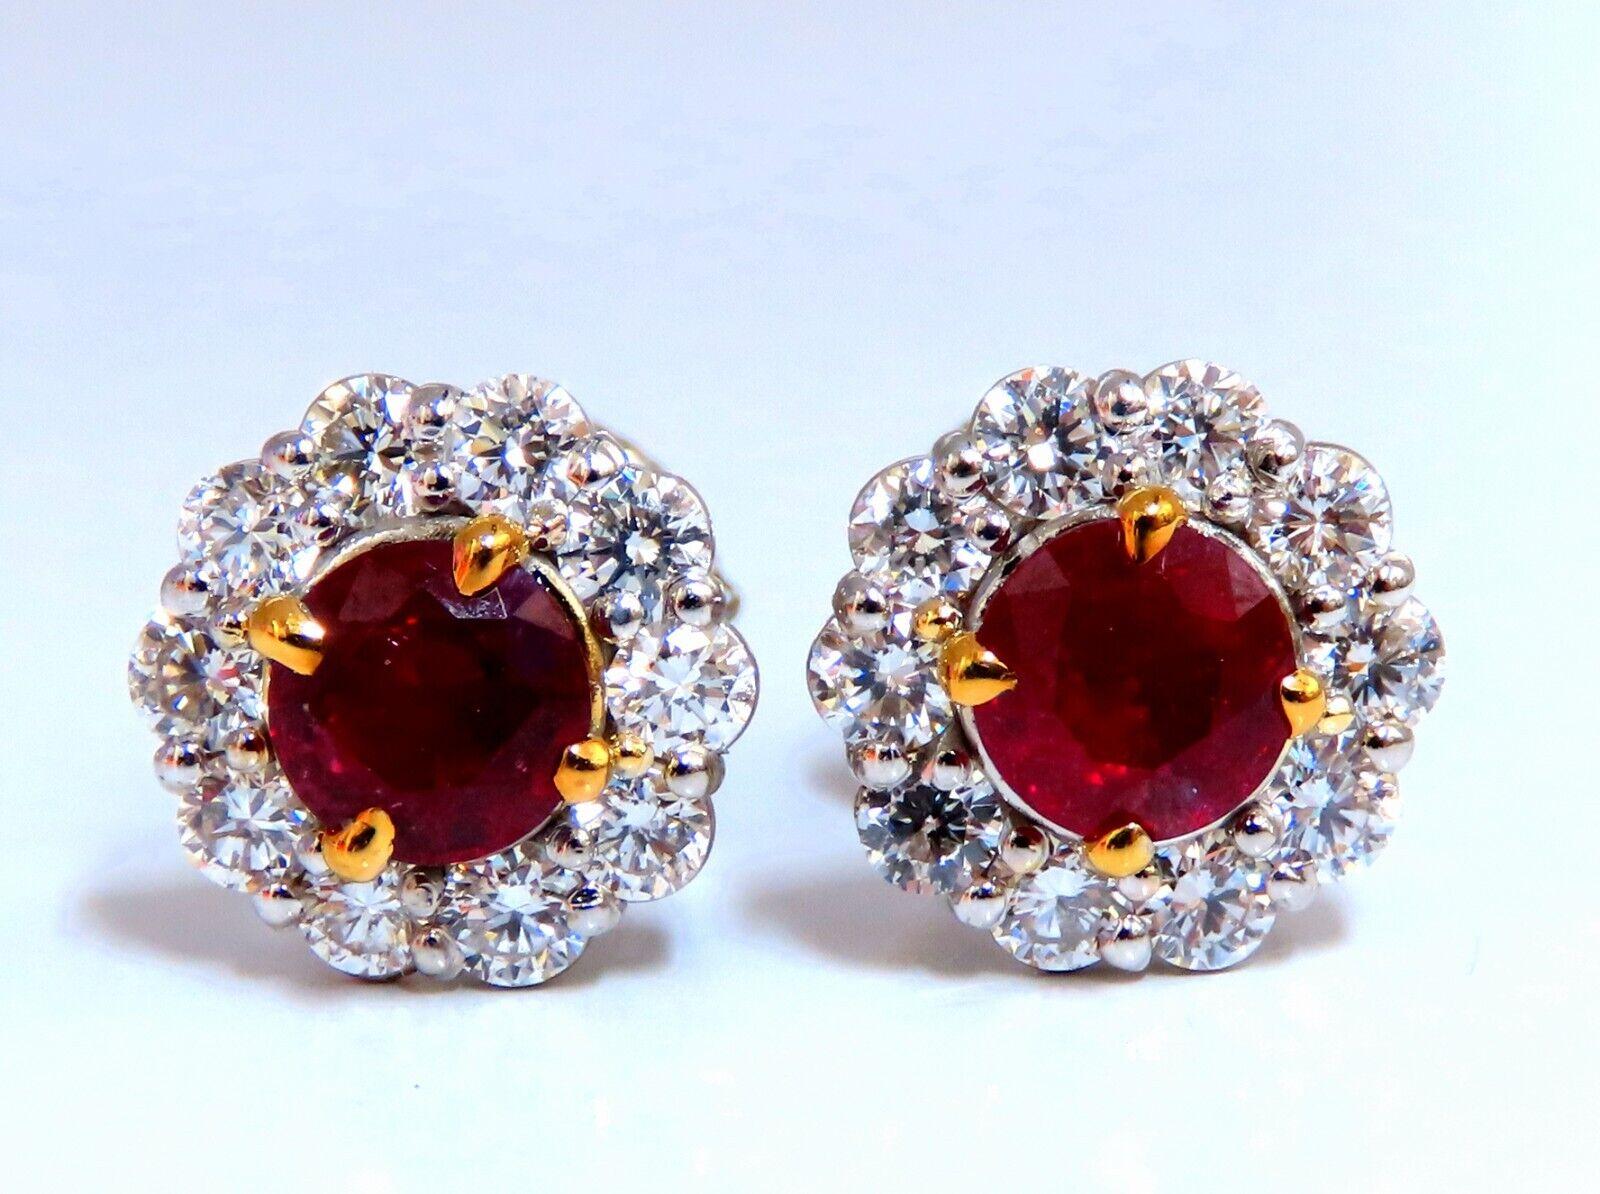 1.20ct natural round ruby diamond cluster earrings

4.9mm ruby, clean clarity transparent.

Heated.

1.20ct. Natural diamonds  

 Rounds, Full cut brilliants.

G- color Vs-2 Clarity. 

Secure push backs

Excellent detail.

14kt. white gold

2.9